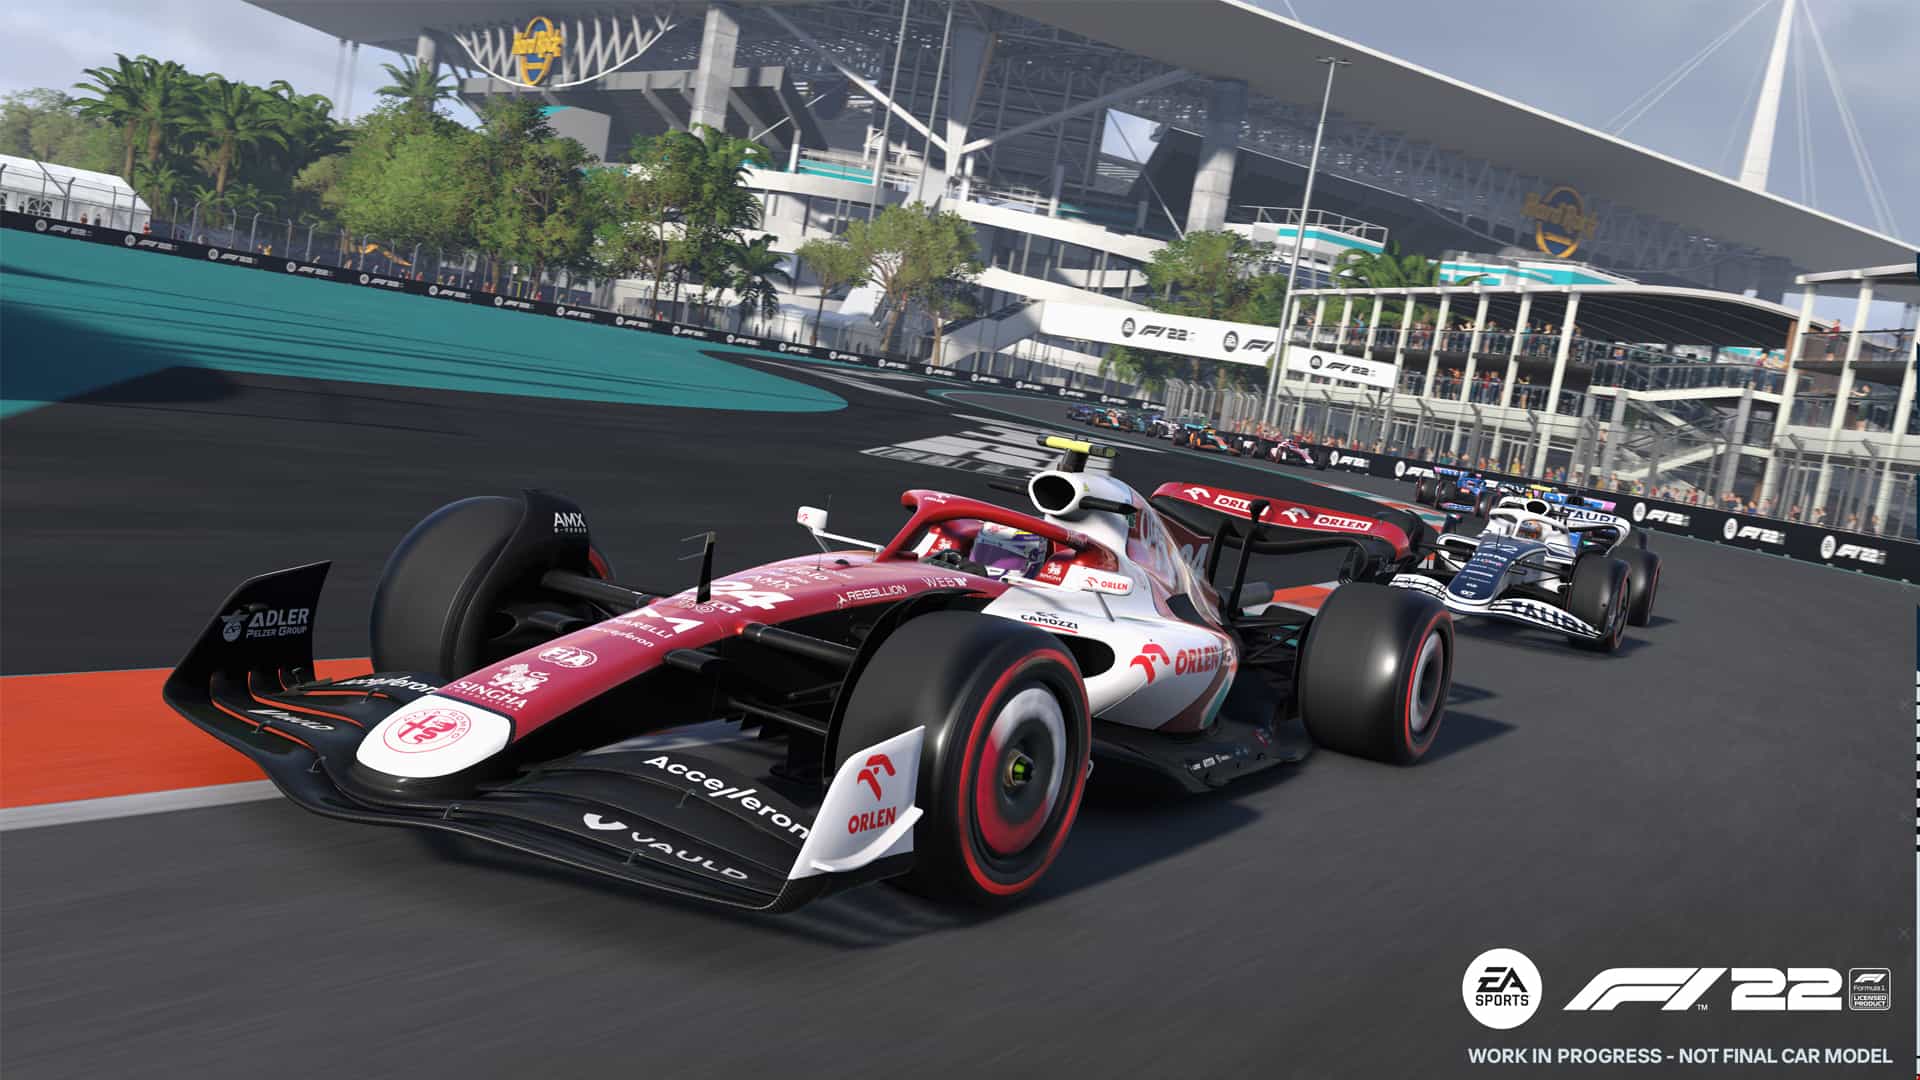 How to access the F1 22 game early